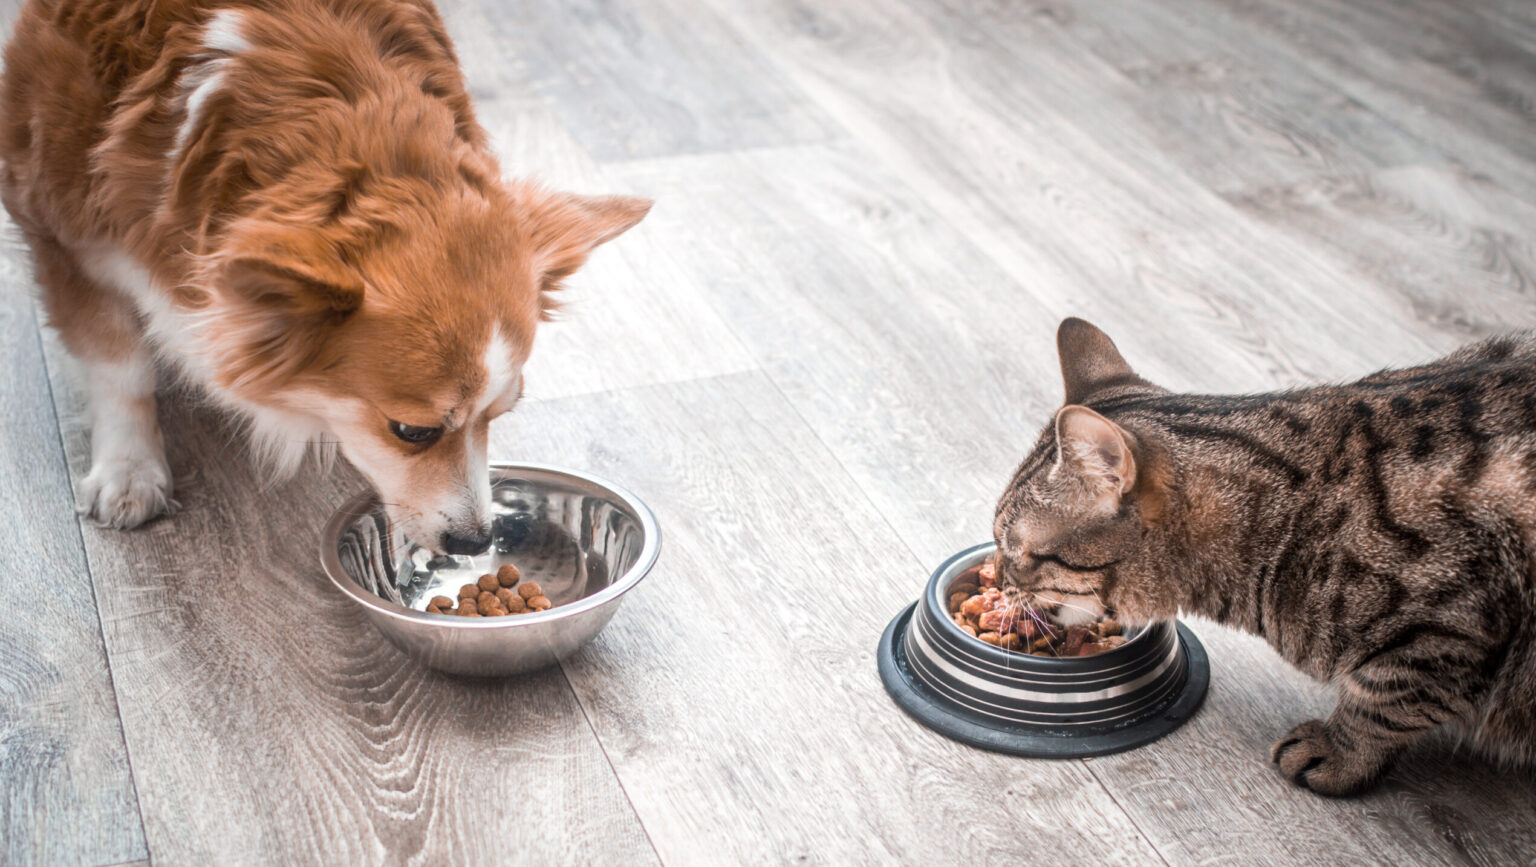 An orange dog and a tabby cat eat from silver bowls opposite each other.